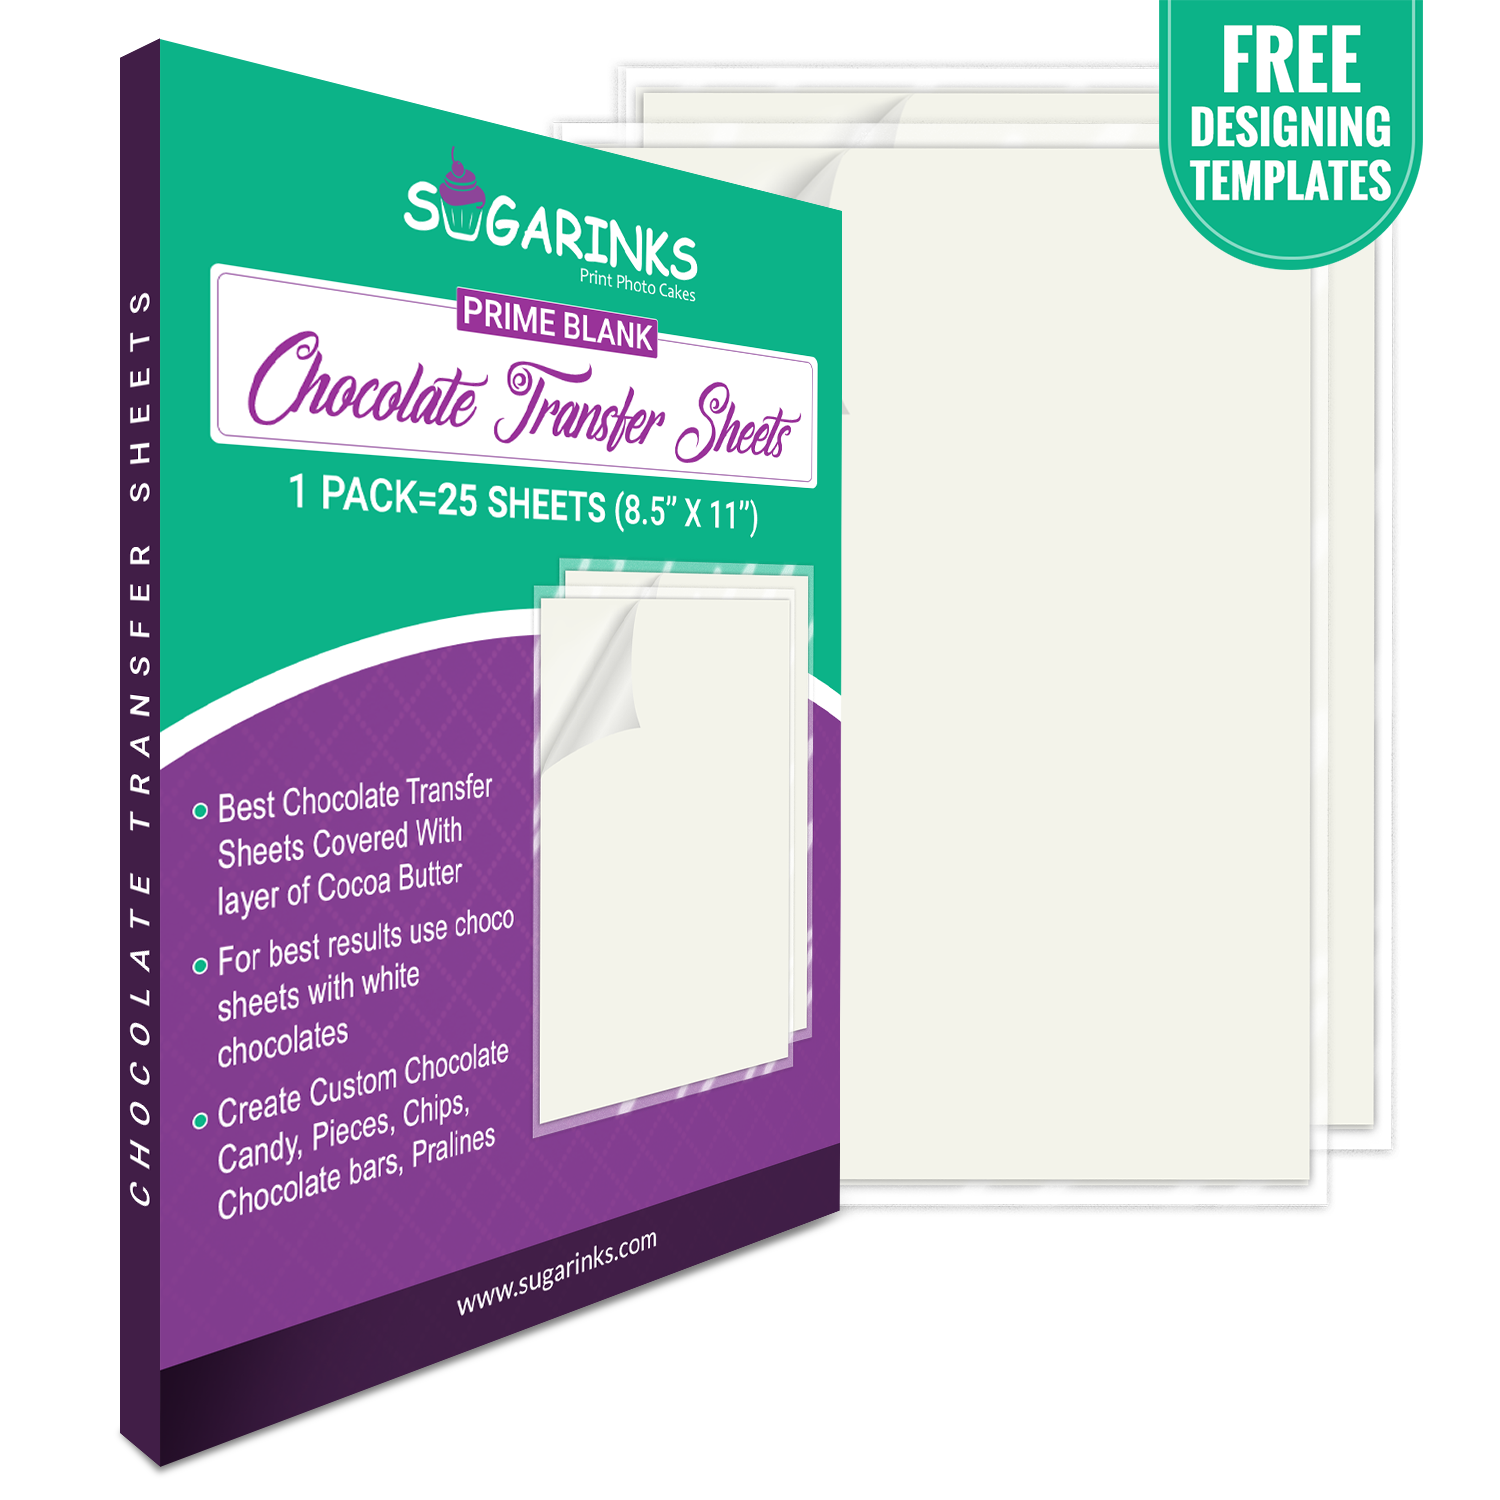 Sugarinks Prime Blank Chocolate Transfer Sheets A4 Size (8.5”X11”) – Pack of 25